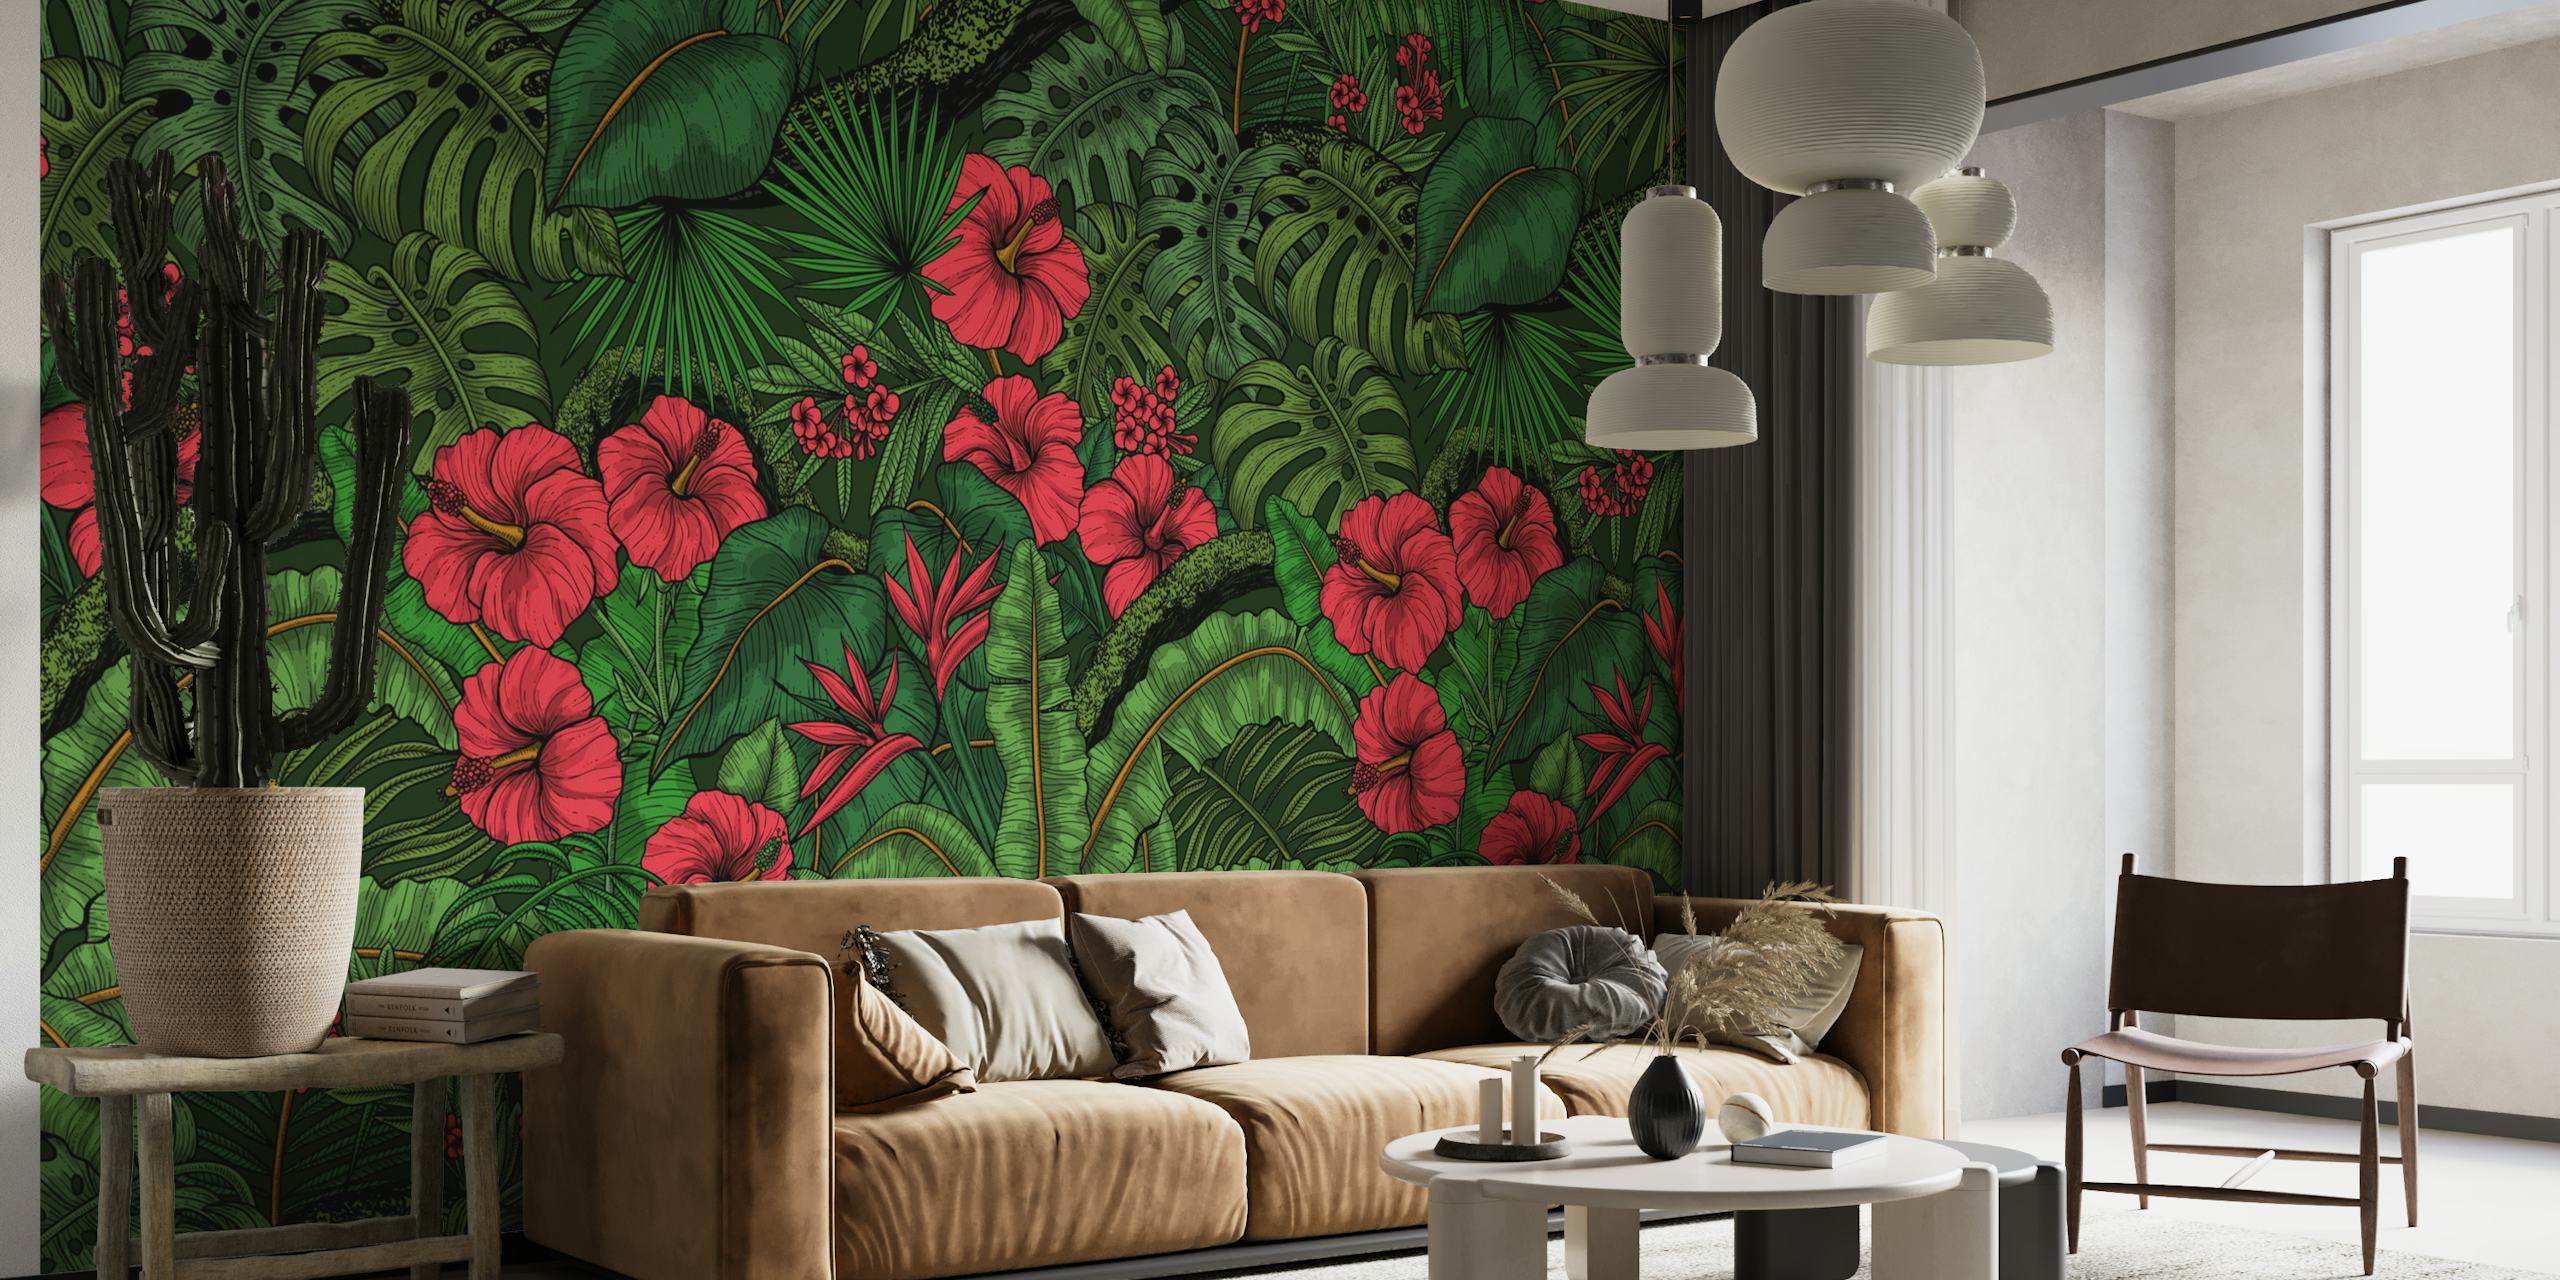 Vibrant tropical garden wall mural with red flowers and lush green leaves